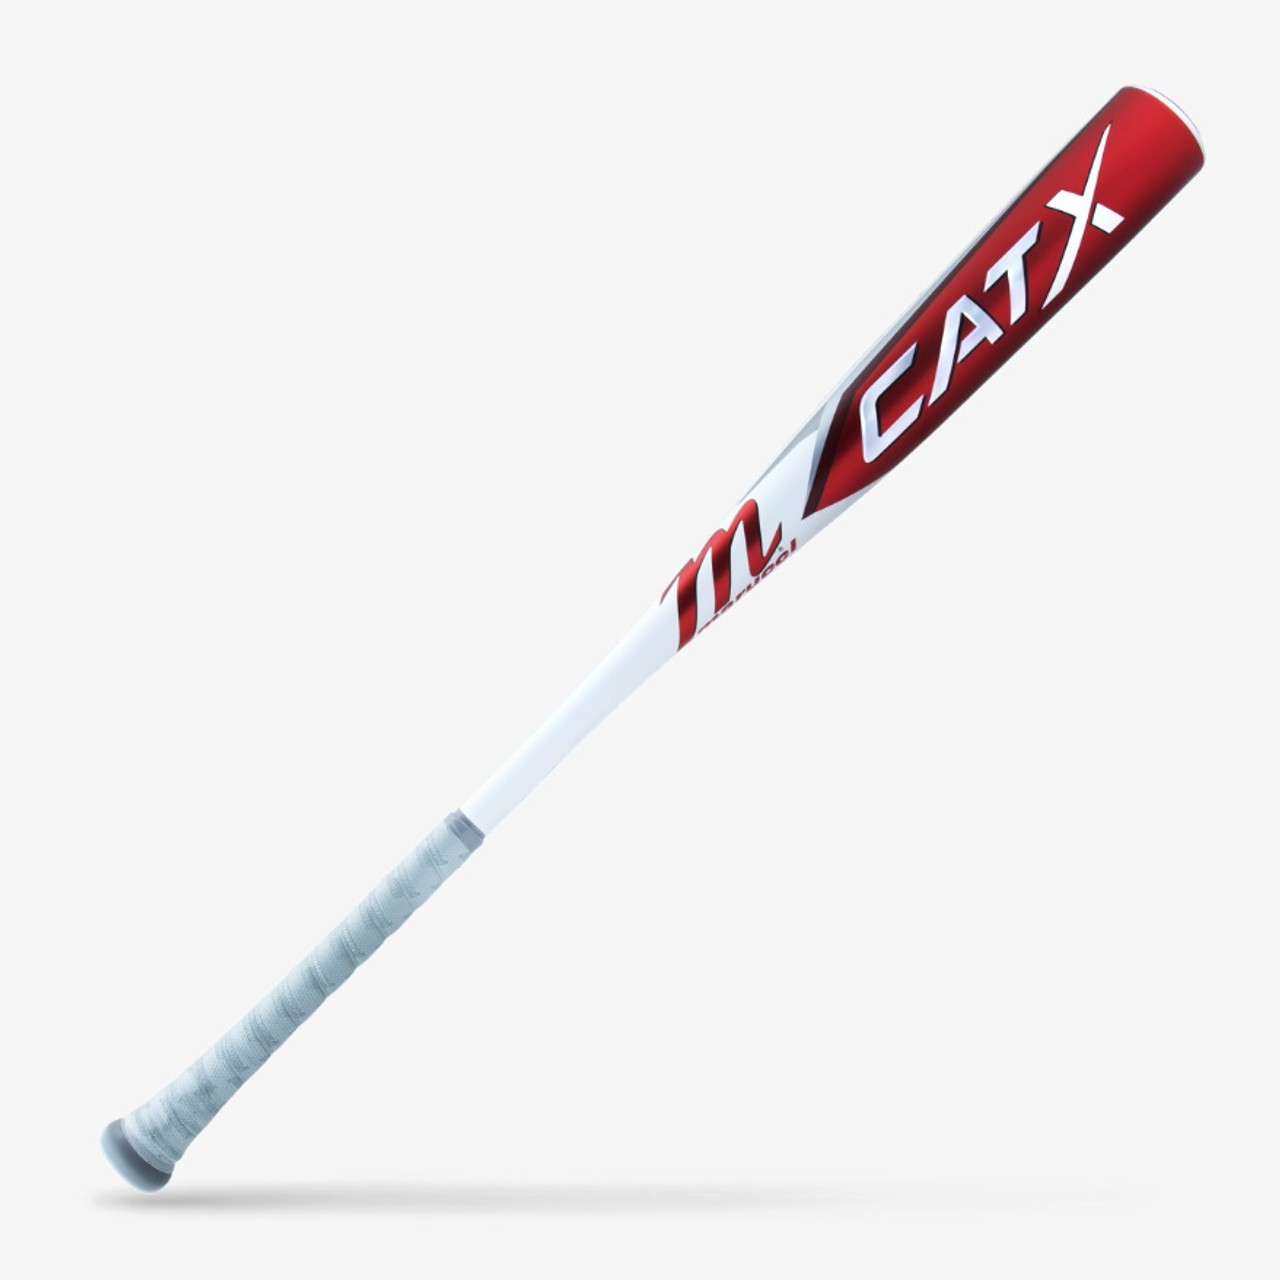 marucci-cat-x-bbcor-3-baseball-bat-30-inch-27-oz MCBCX-3027   <h1 class=productView-title-lower>THE CATX BBCOR</h1> <p><span><span style=font-size large;>The CATX baseball bat is